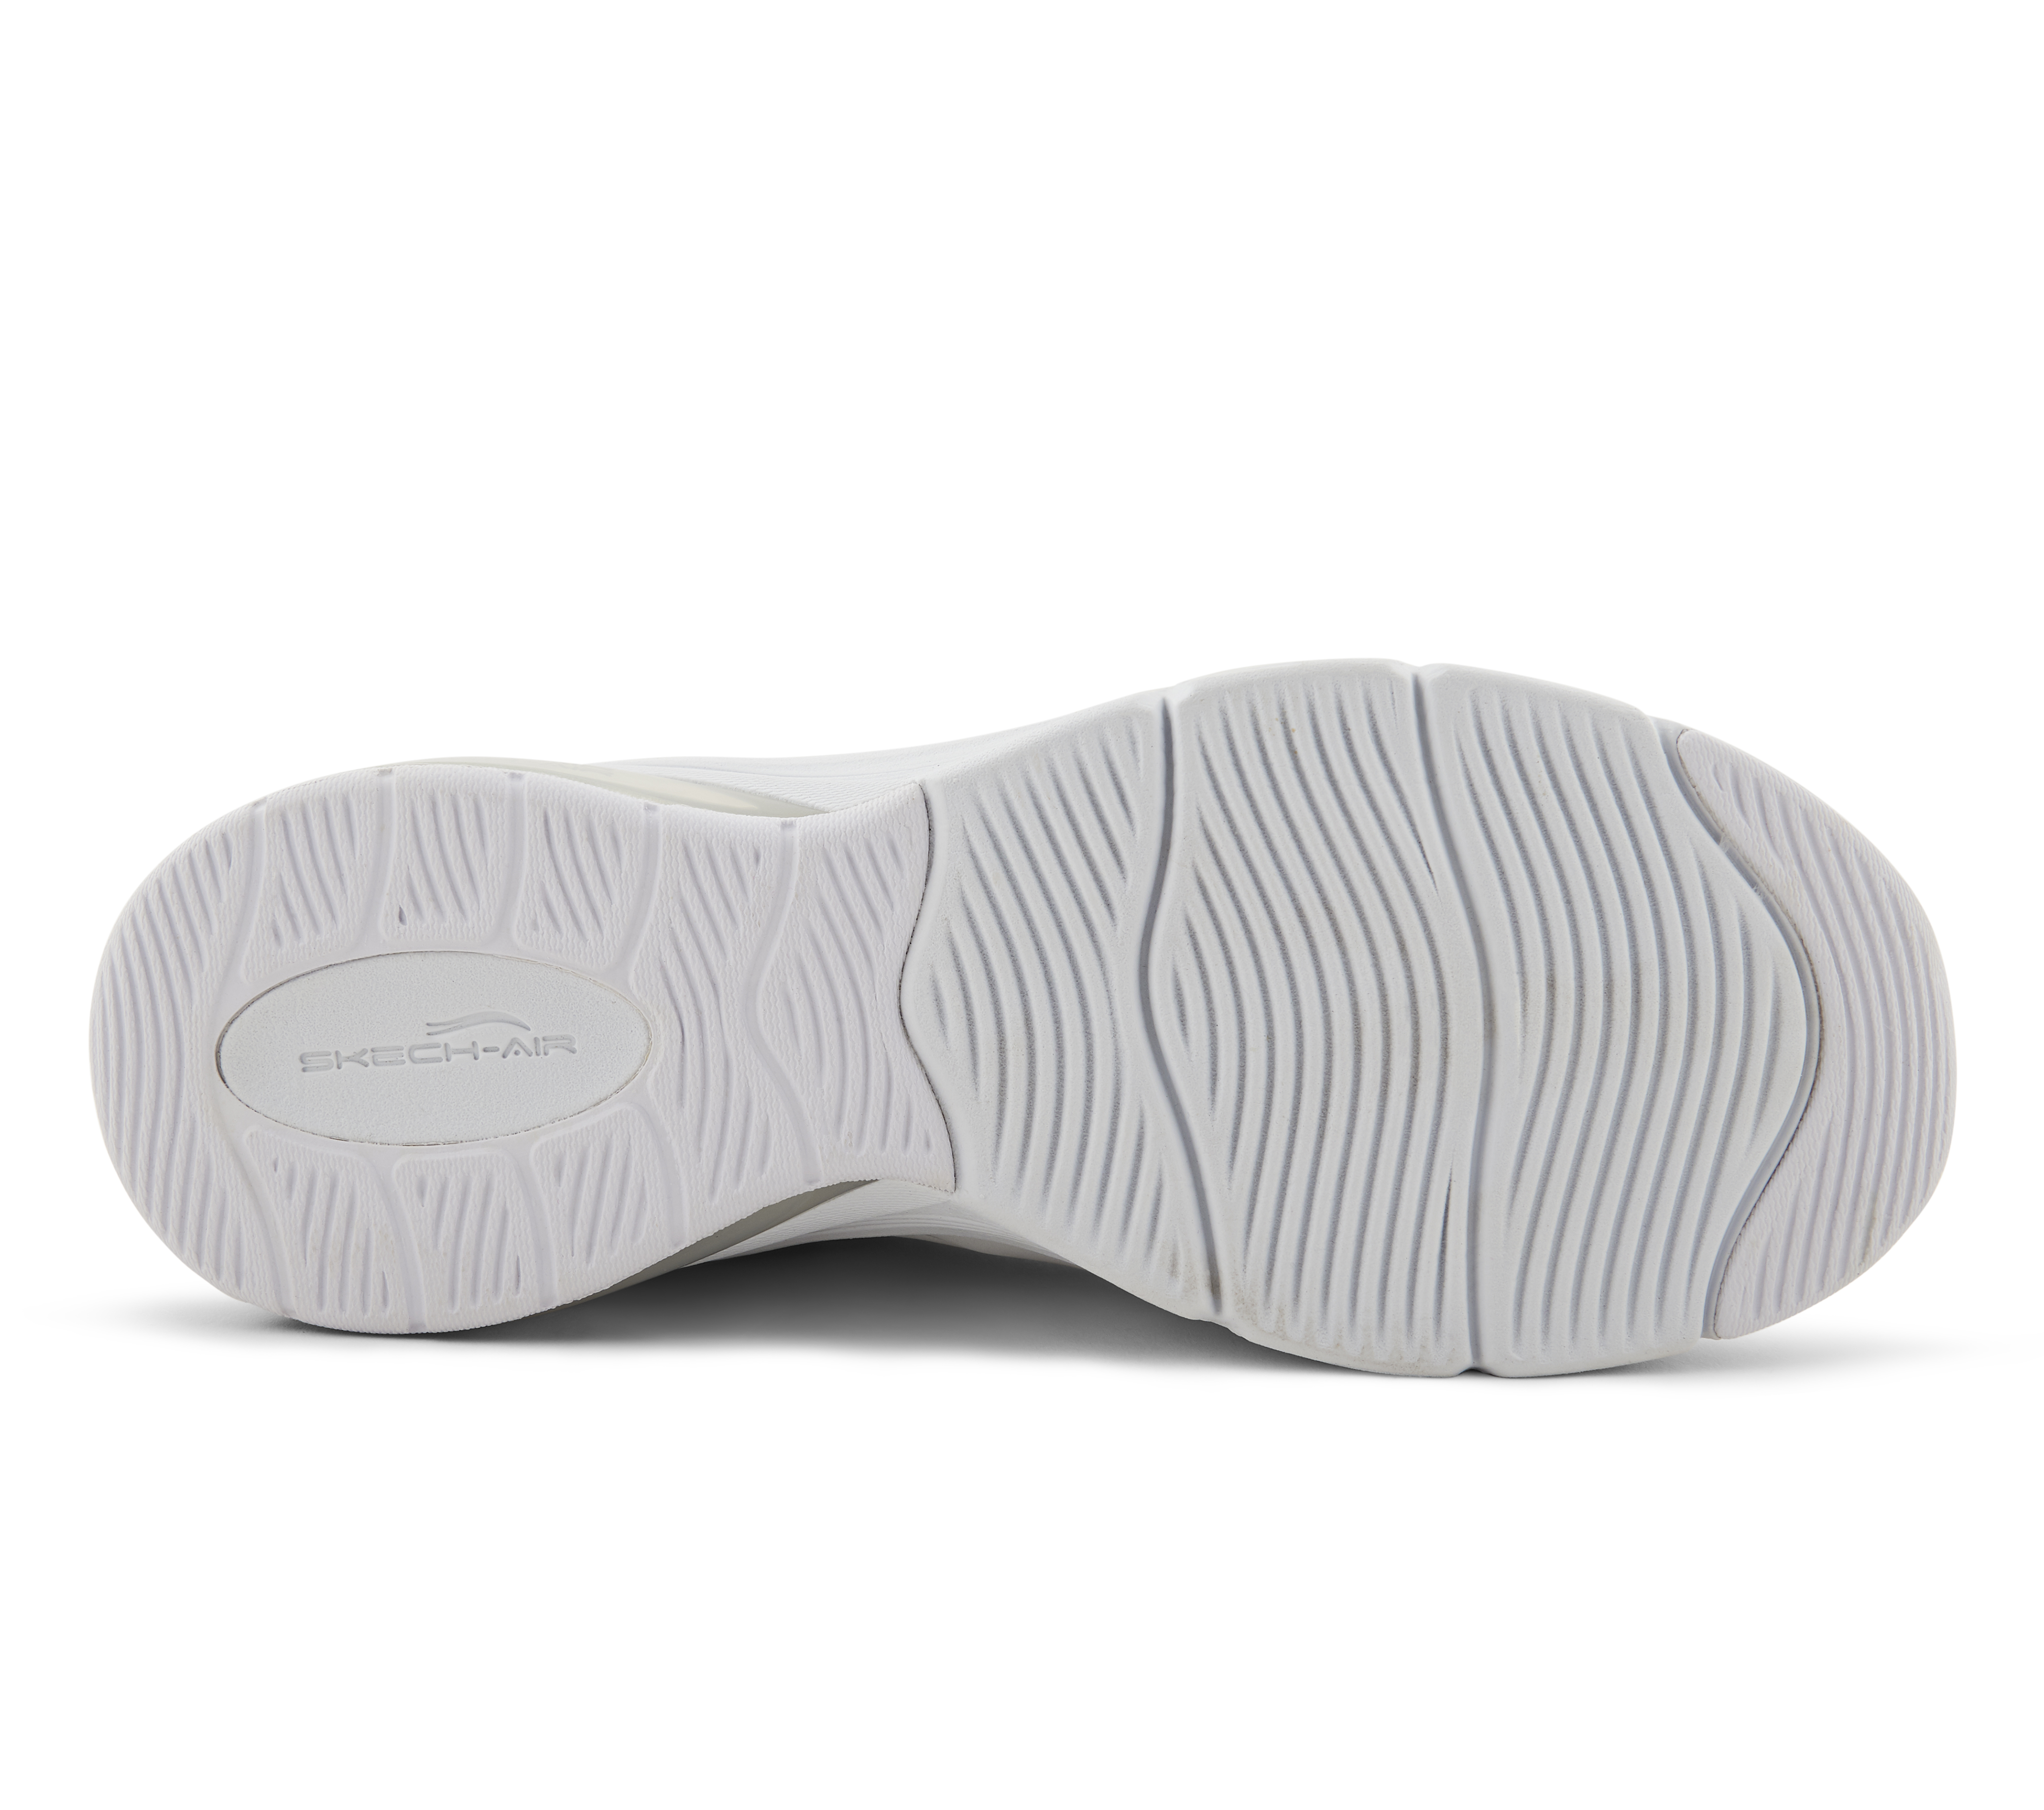 SKECH-AIR EXTREME 2.0-CLASSIC, WWWHITE Footwear Bottom View